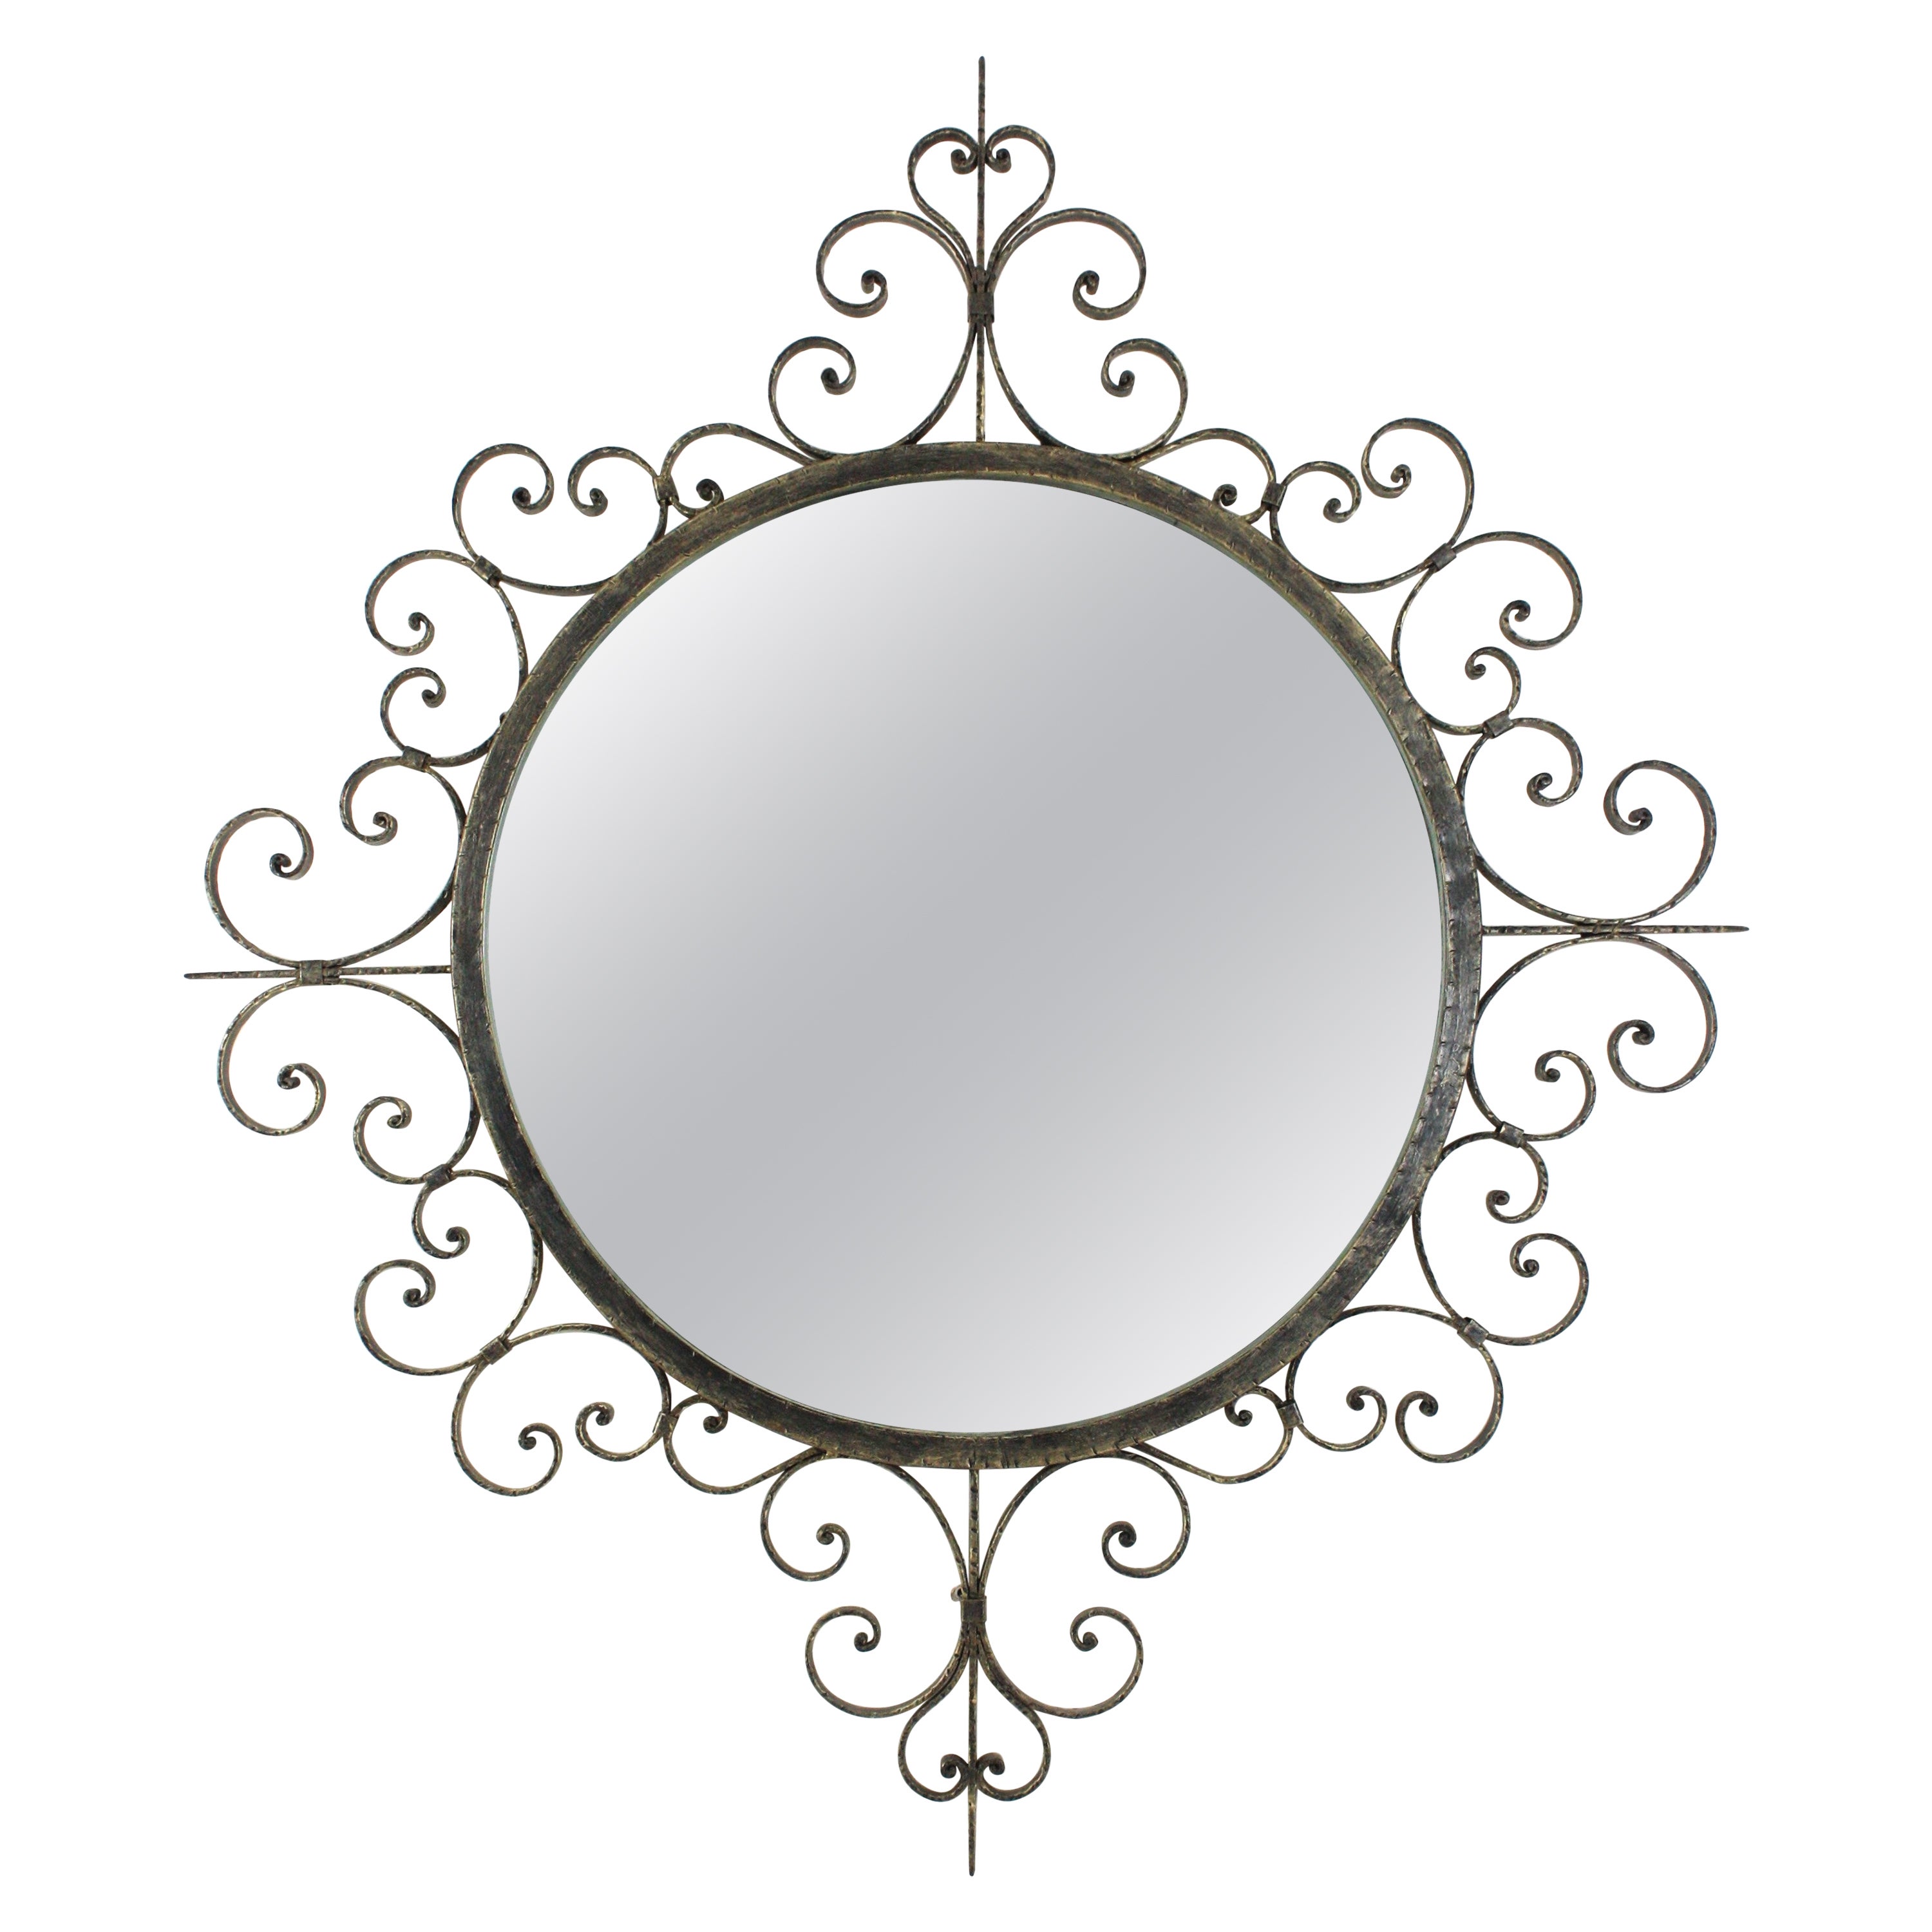 Wrought Iron Mirror with Scroll Work Frame, Spain, 1940s For Sale